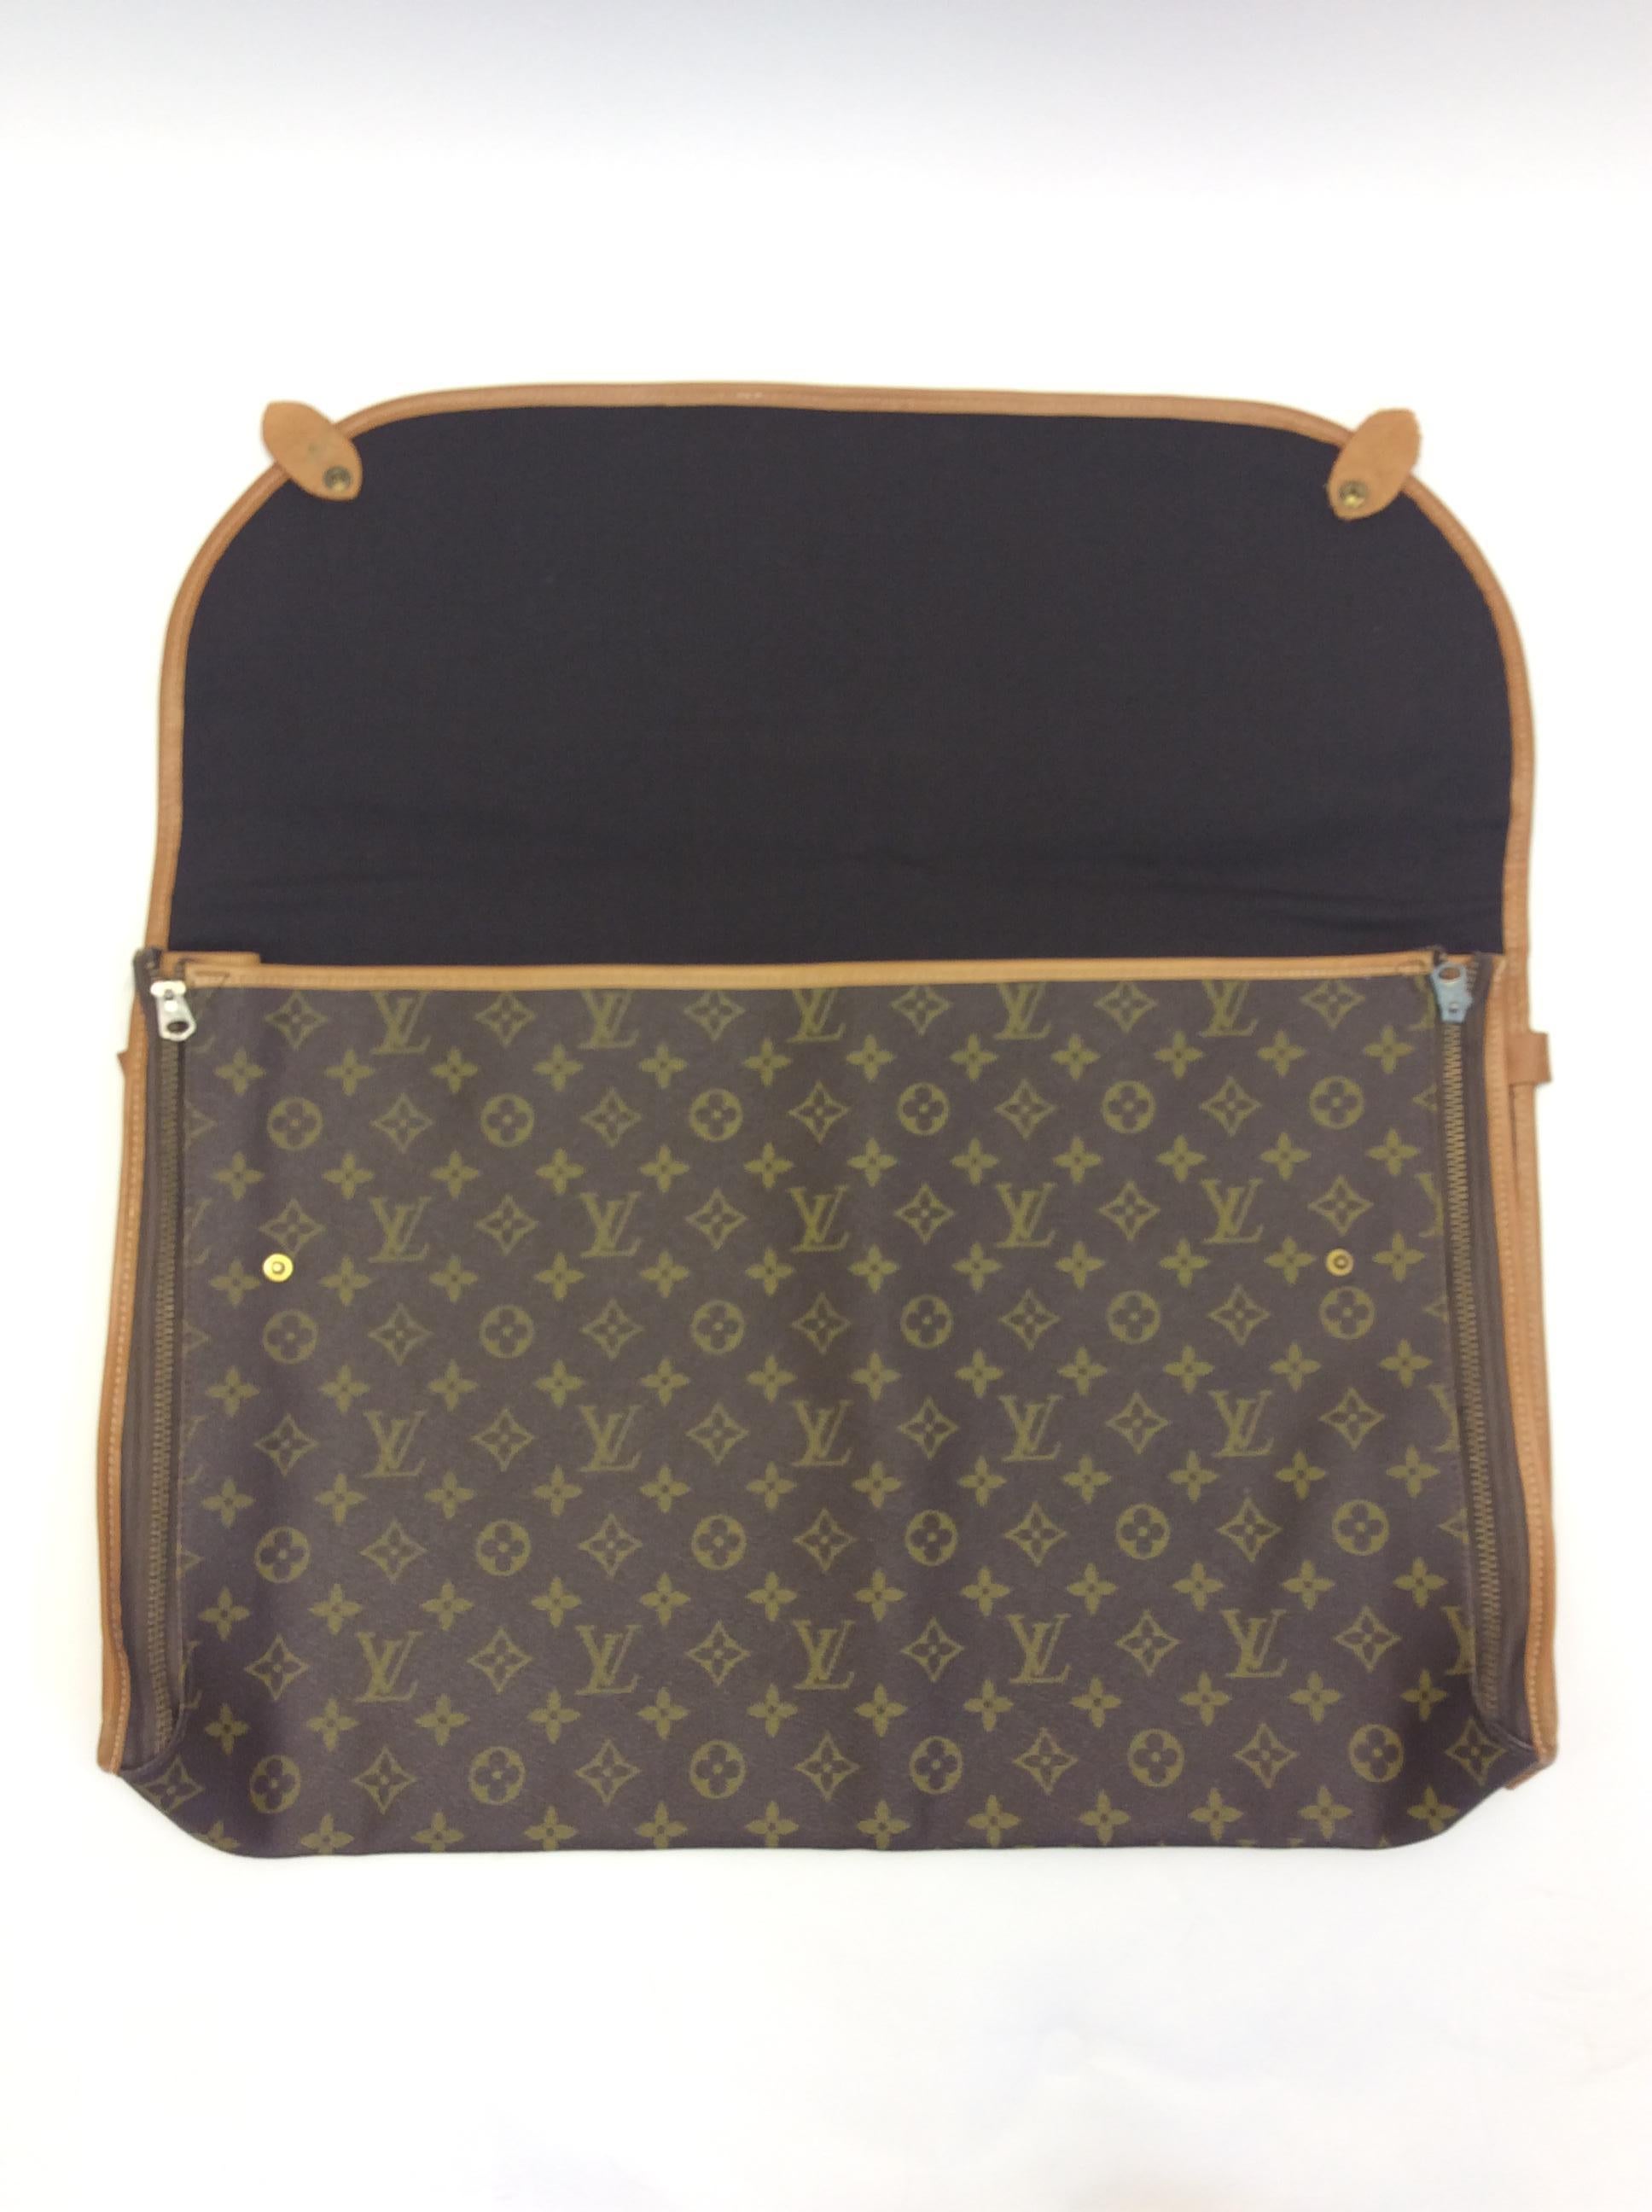 Louis Vuitton Medium Luggage Insert In Good Condition For Sale In Narberth, PA